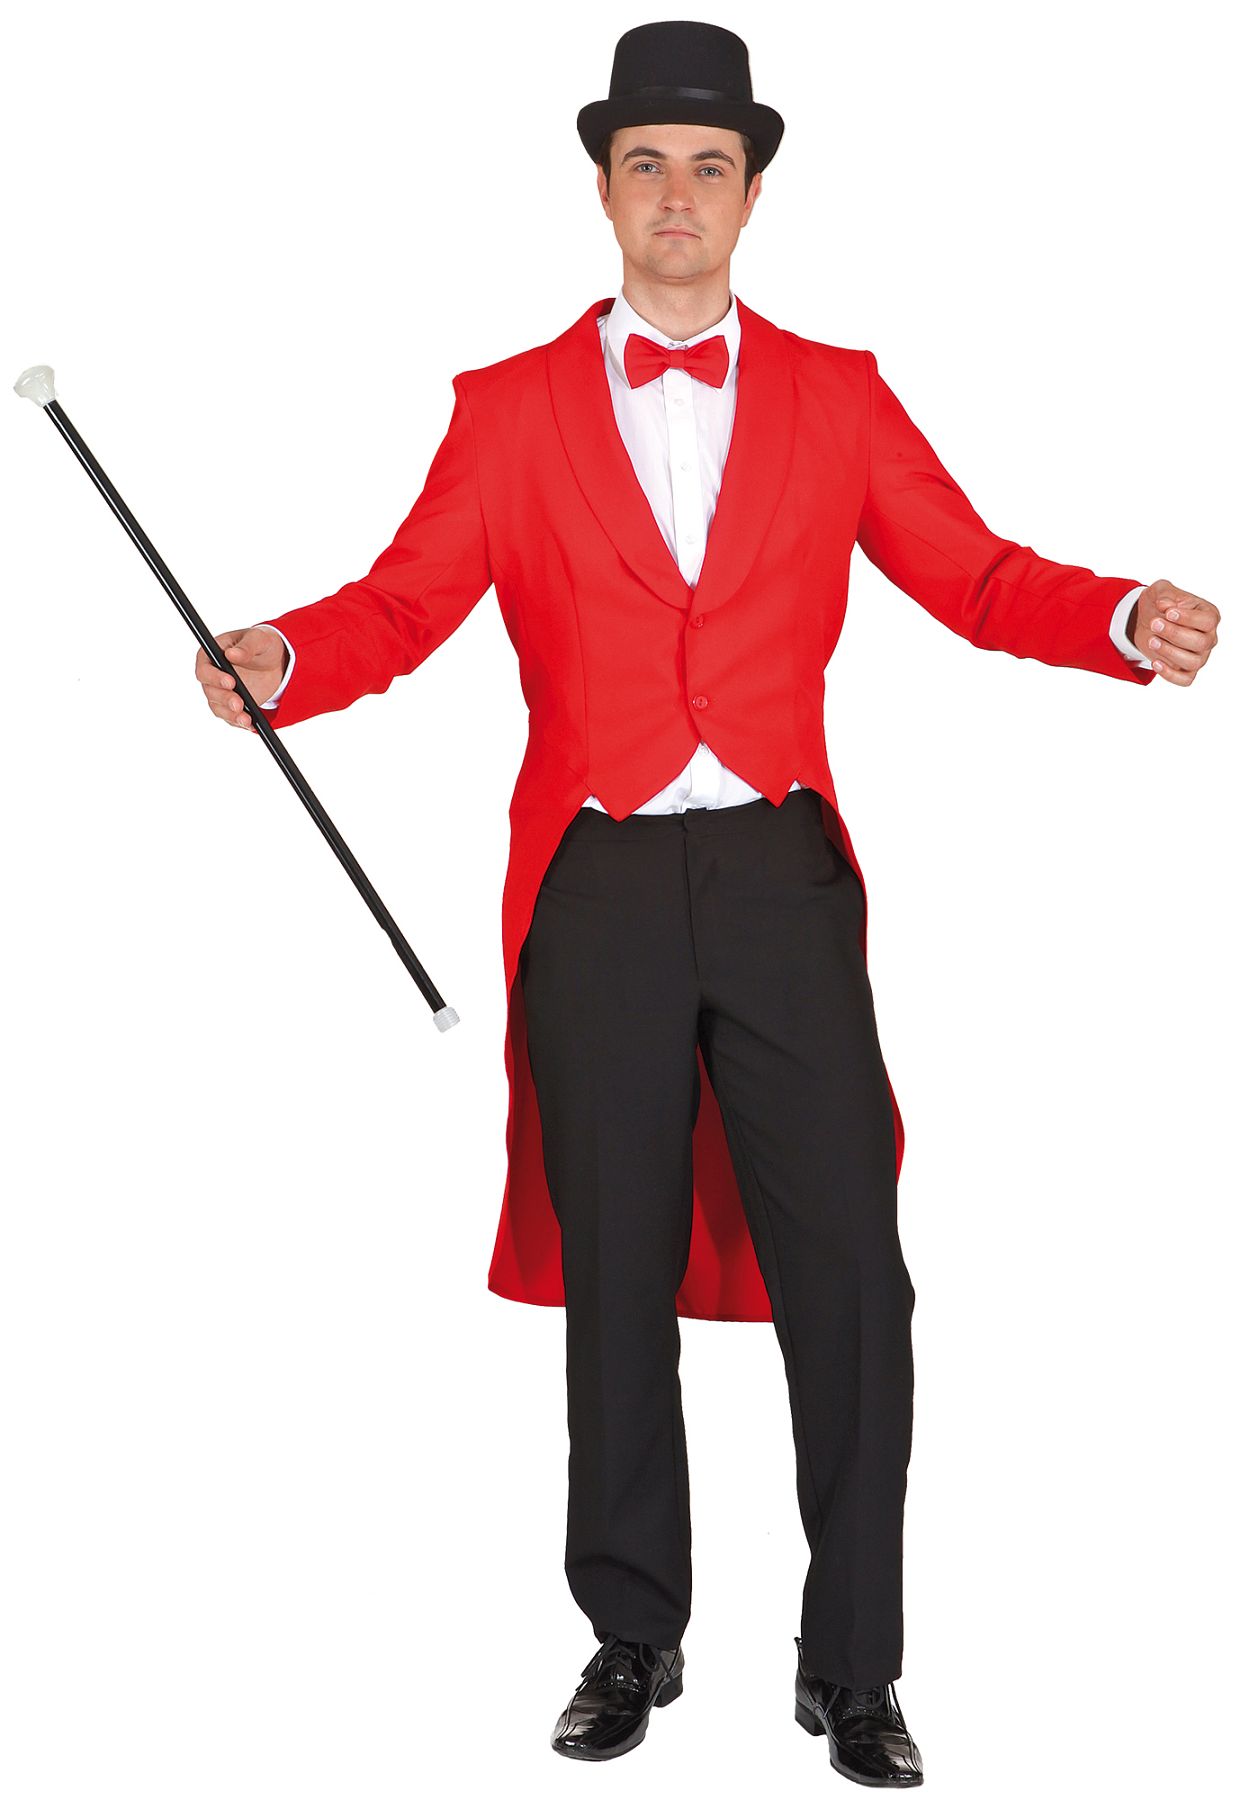 Gents tailcoat, red